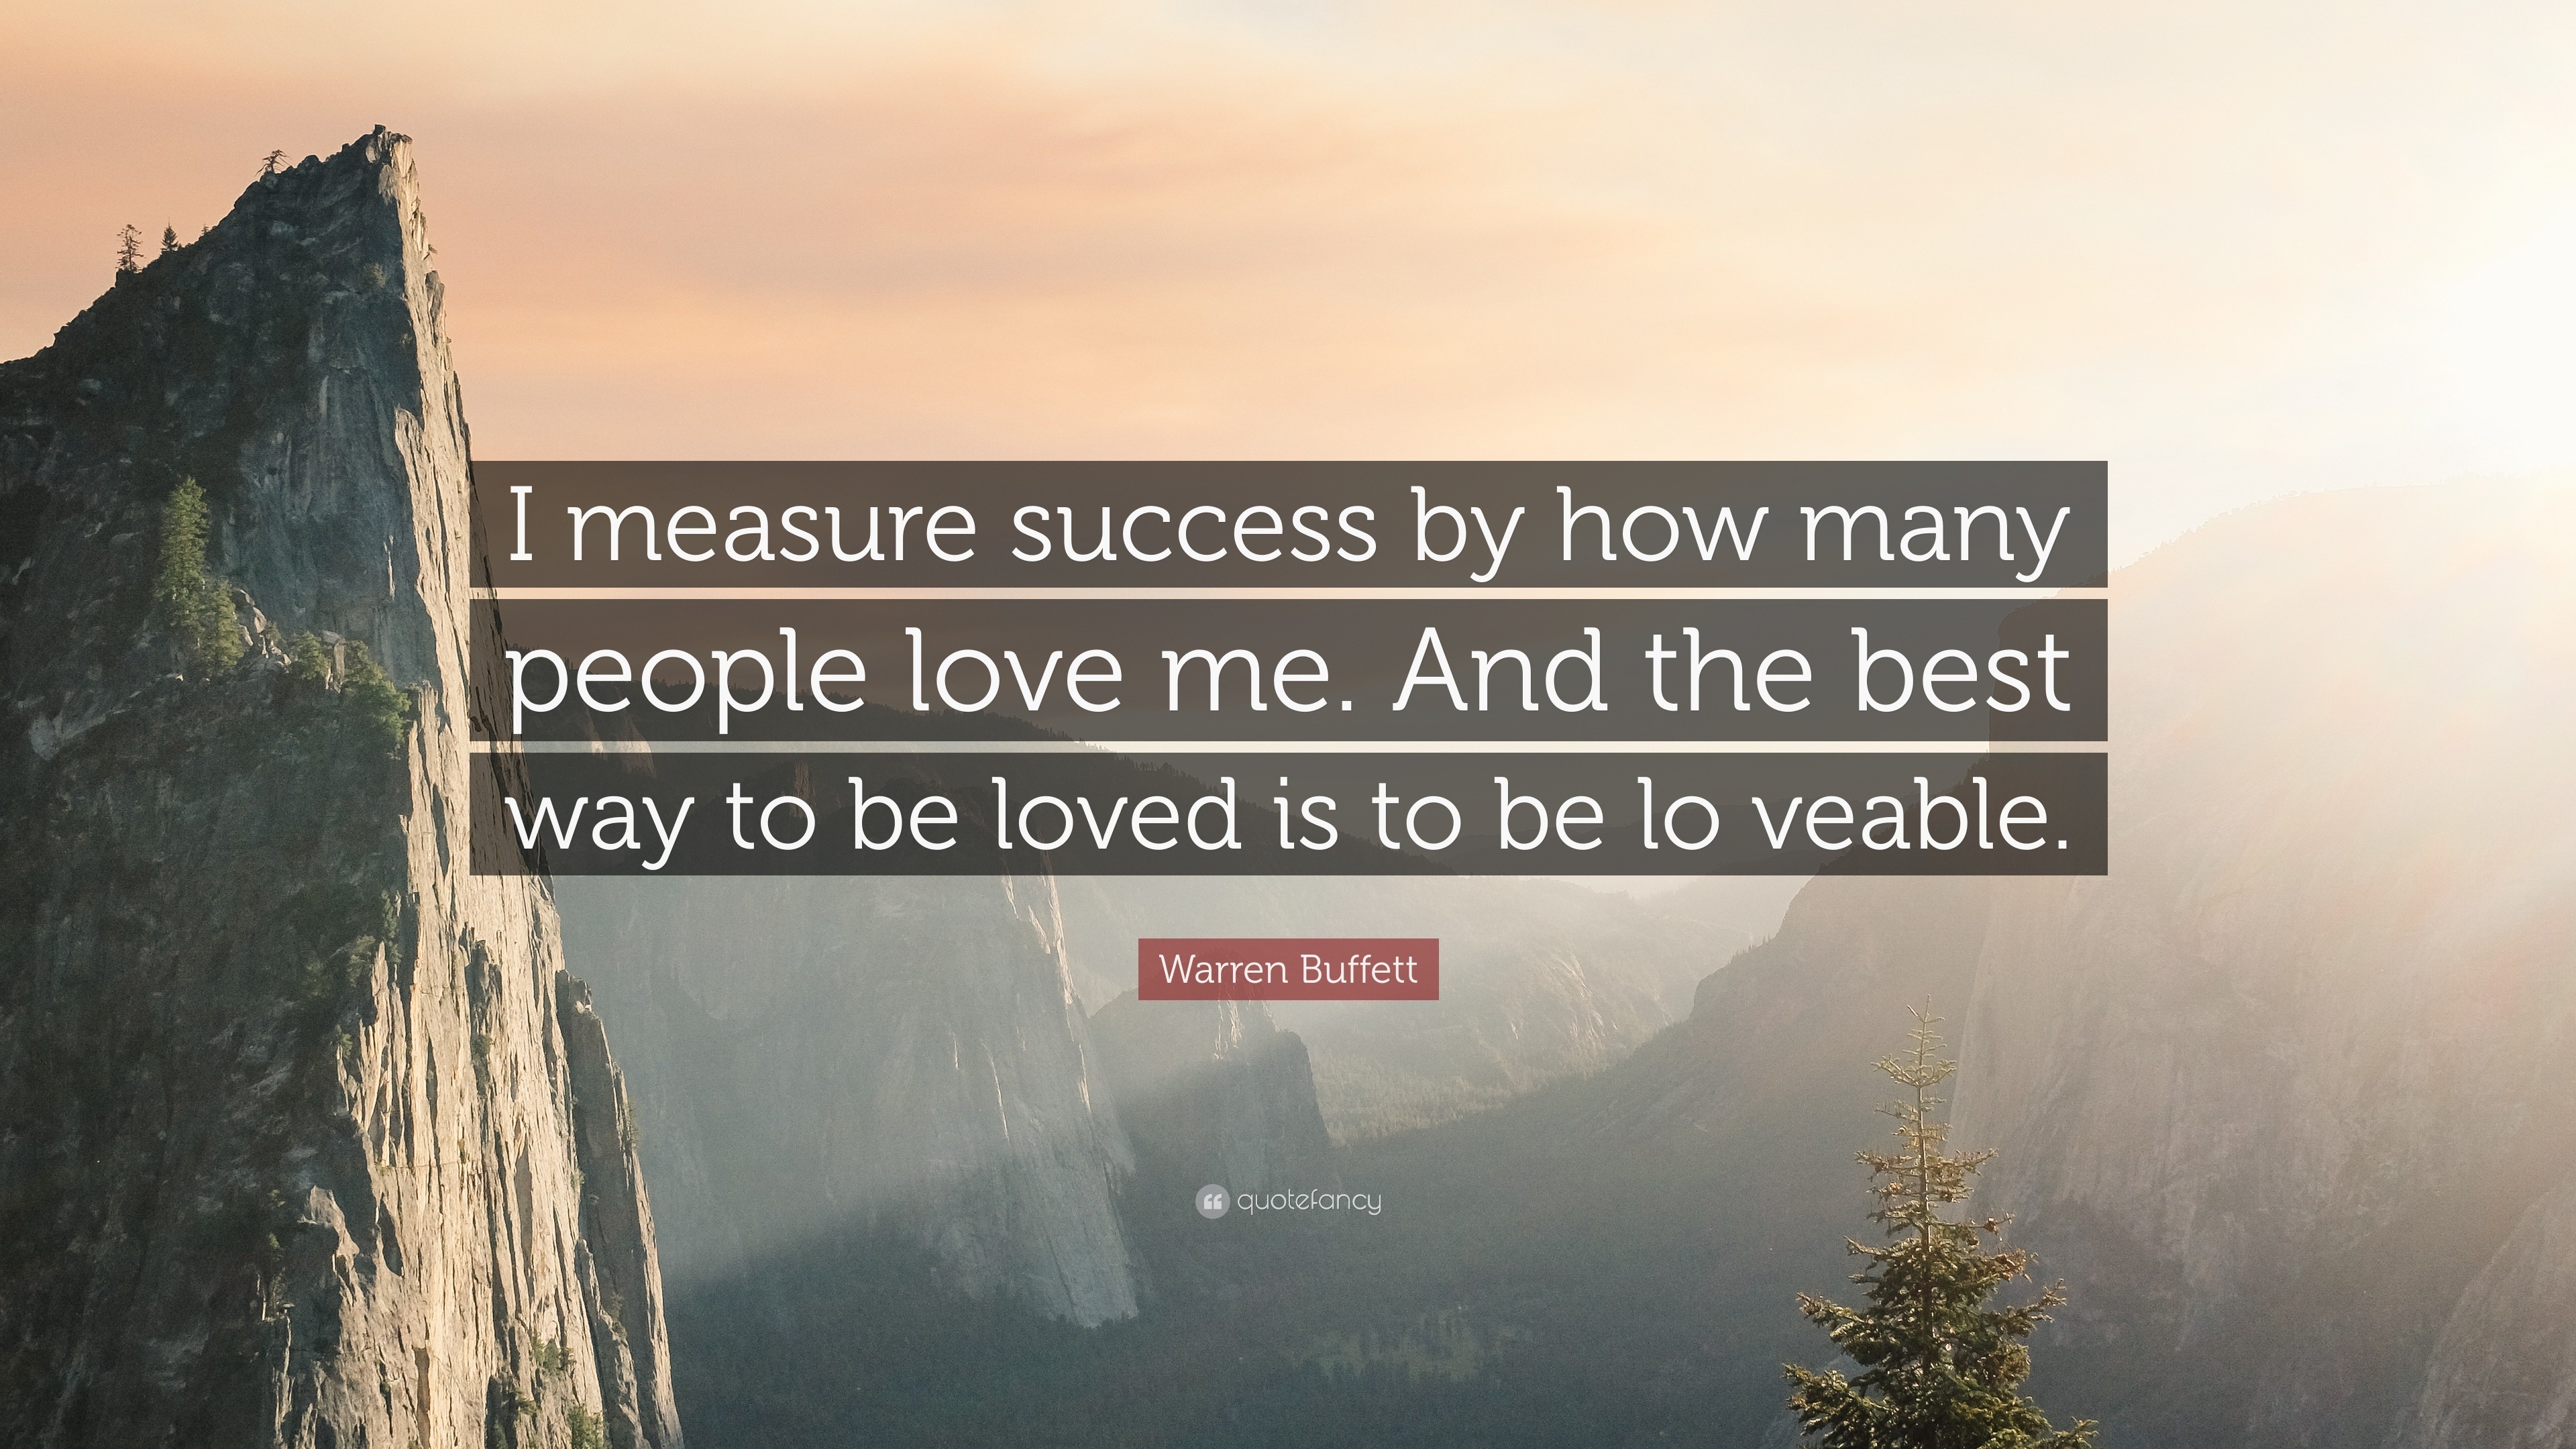 Warren Buffett Quote I Measure Success By How Many People Love Me And The Best Way